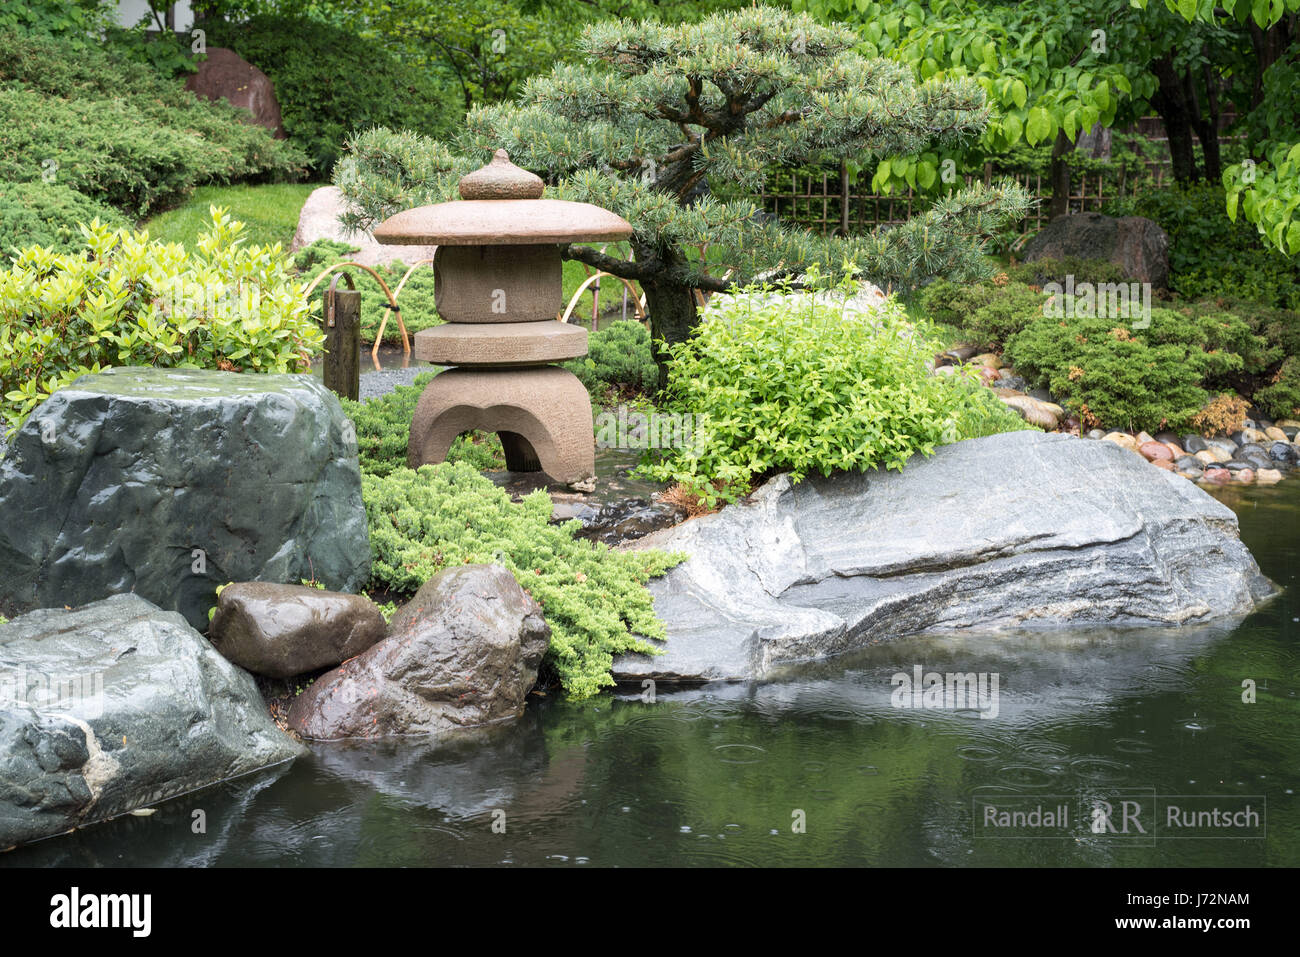 A stone lantern overlooks a pond in a Japanese garden Stock Photo